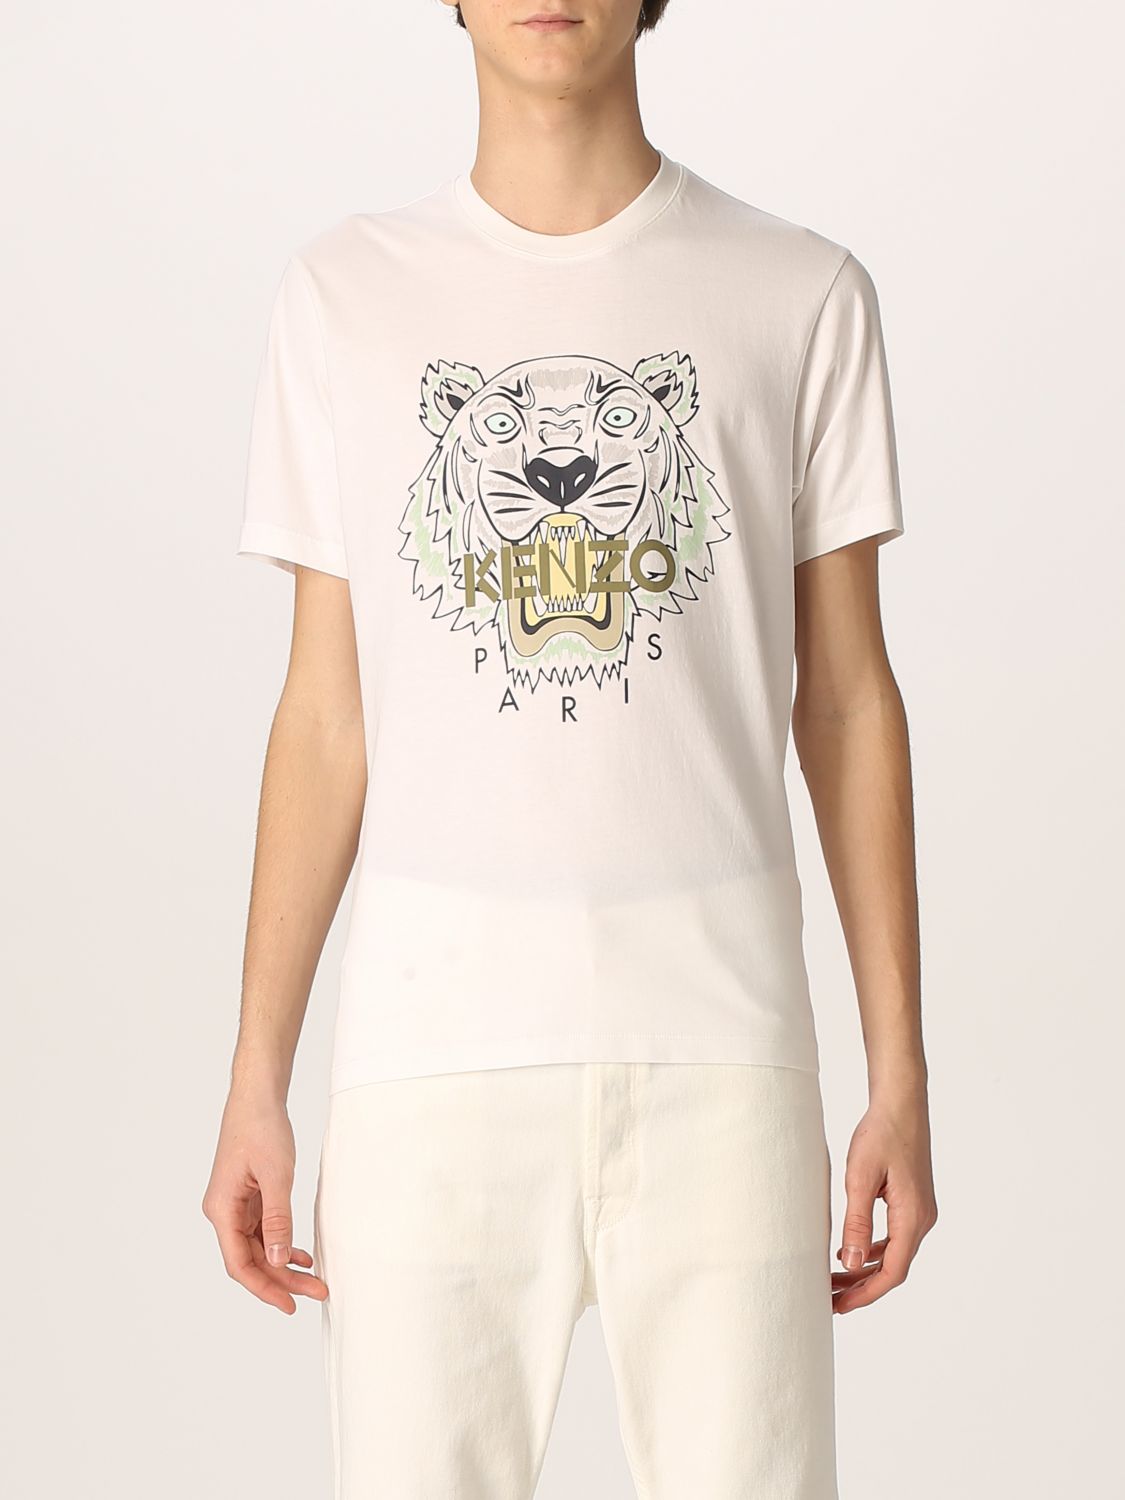 Kenzo cotton T-shirt with logo and Tiger